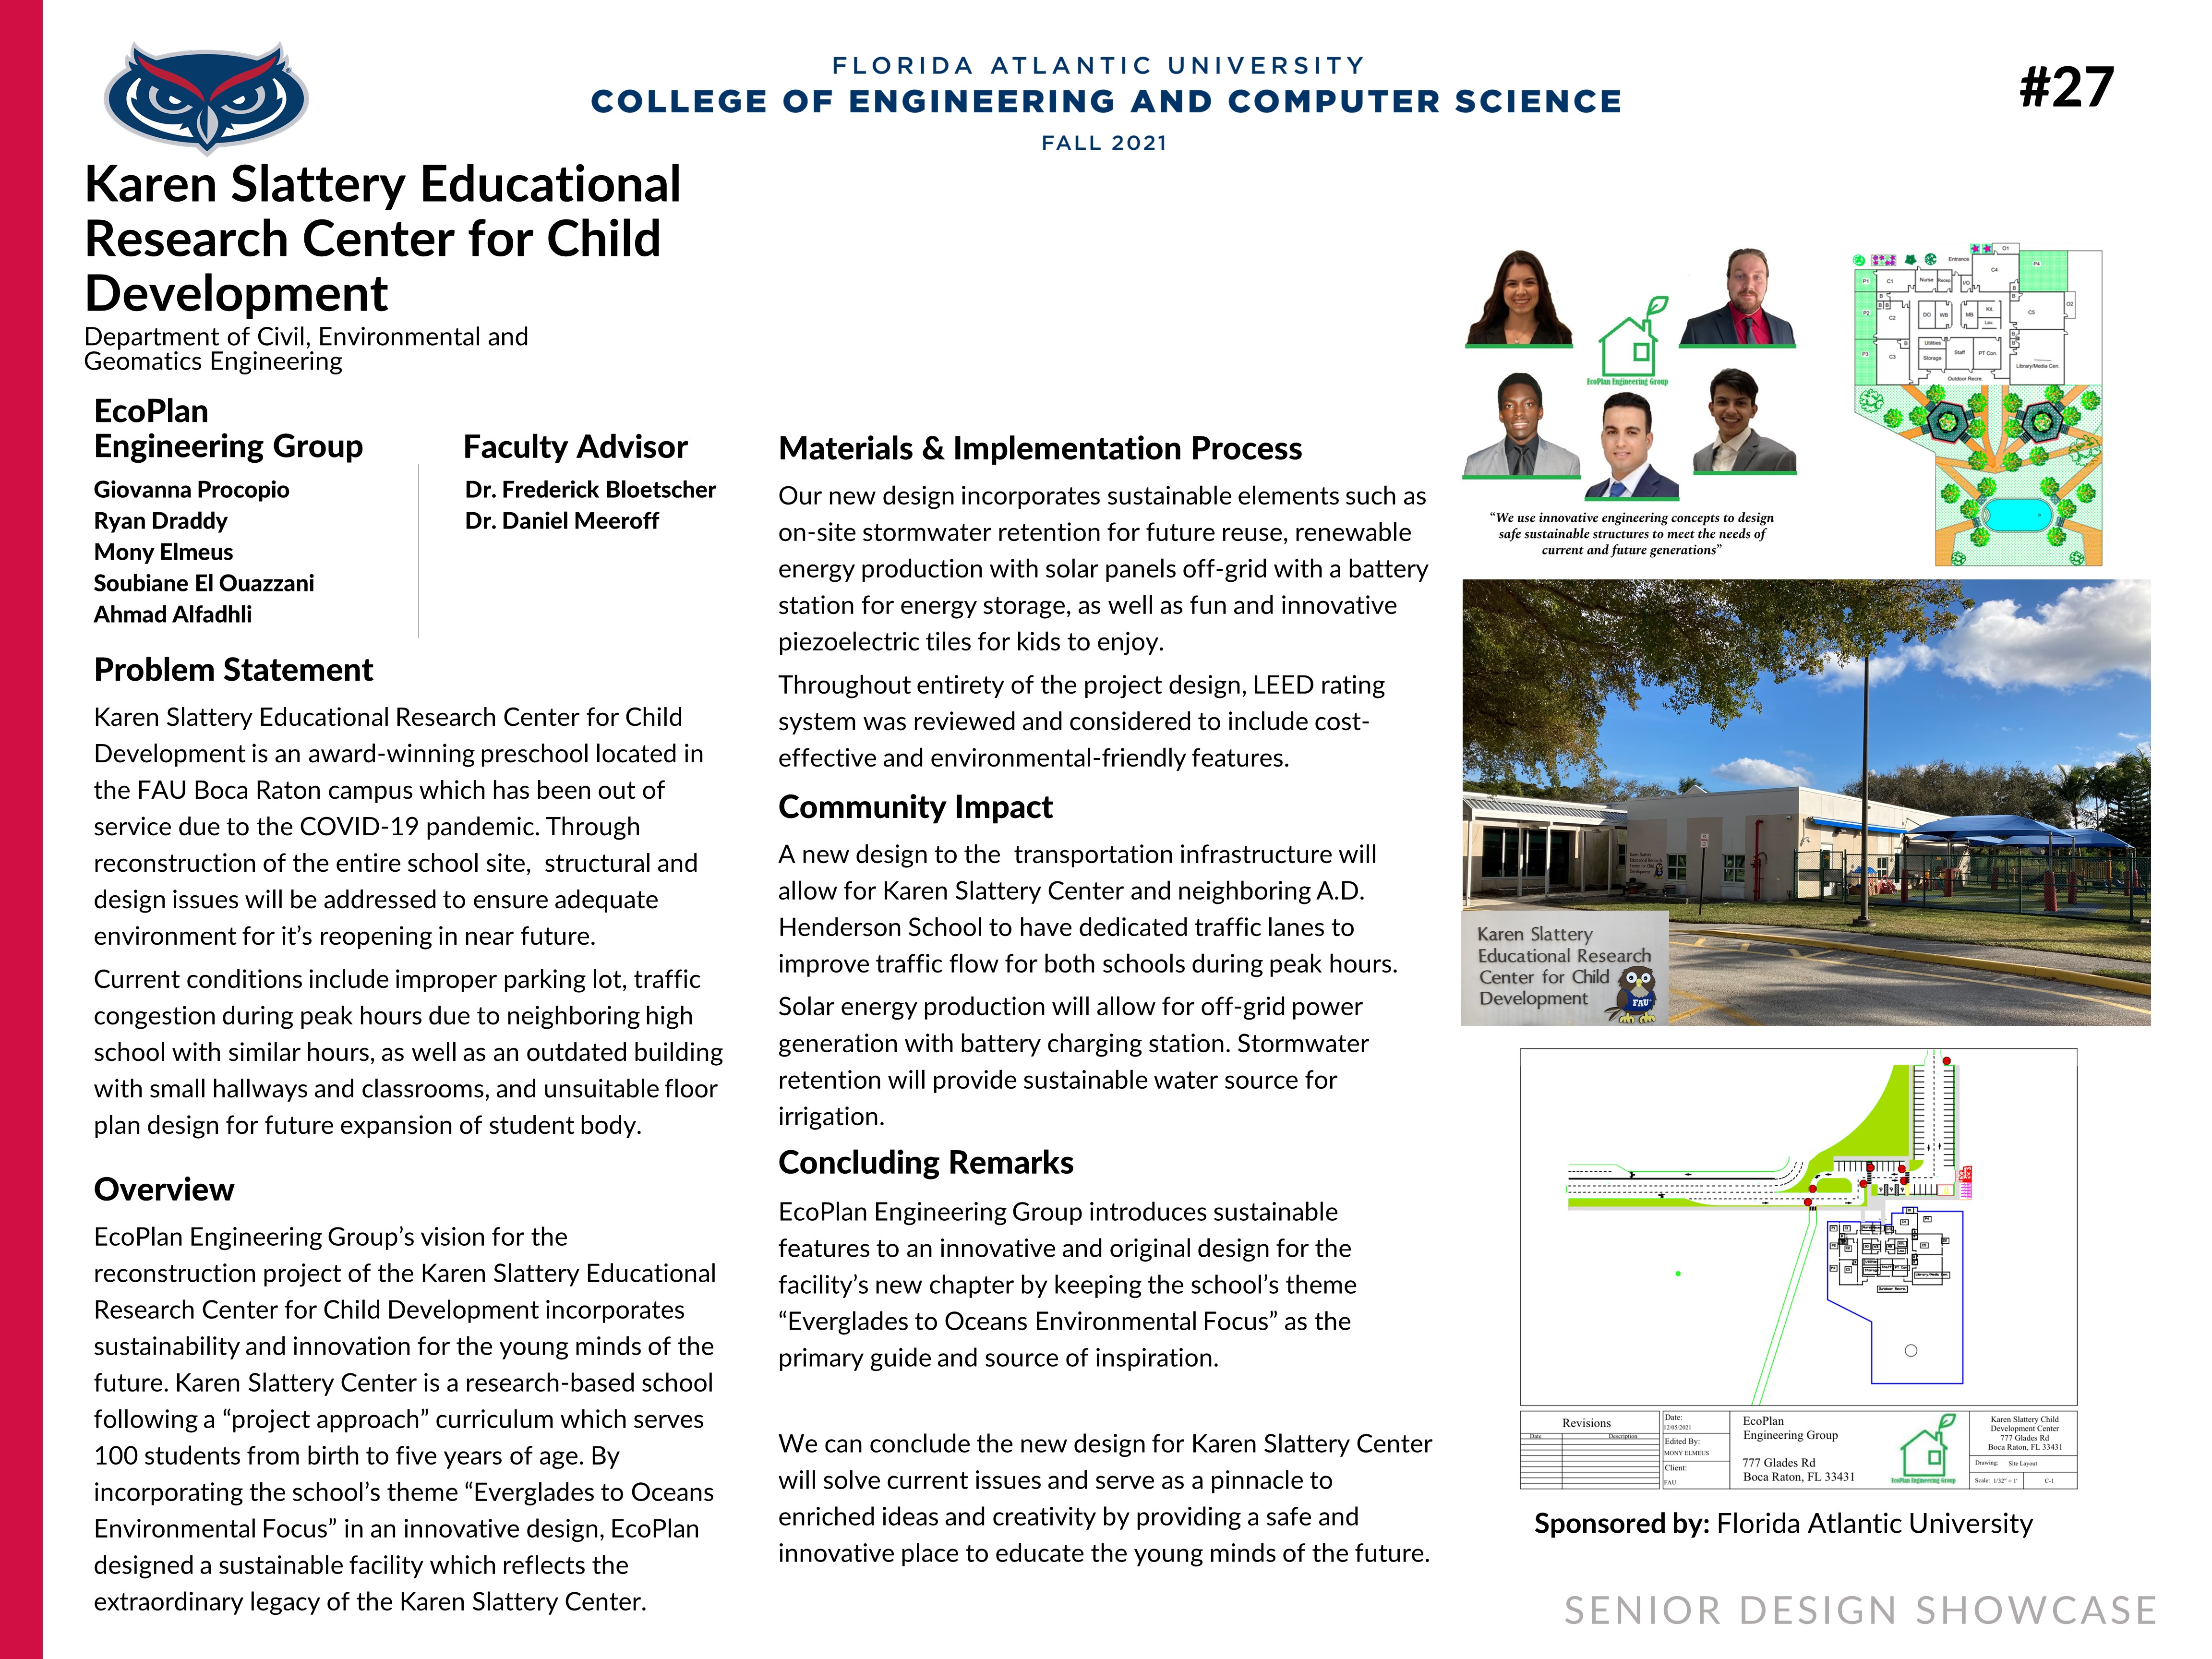 Karen Slattery Research Facility and School (EcoPlan Engineering Group)